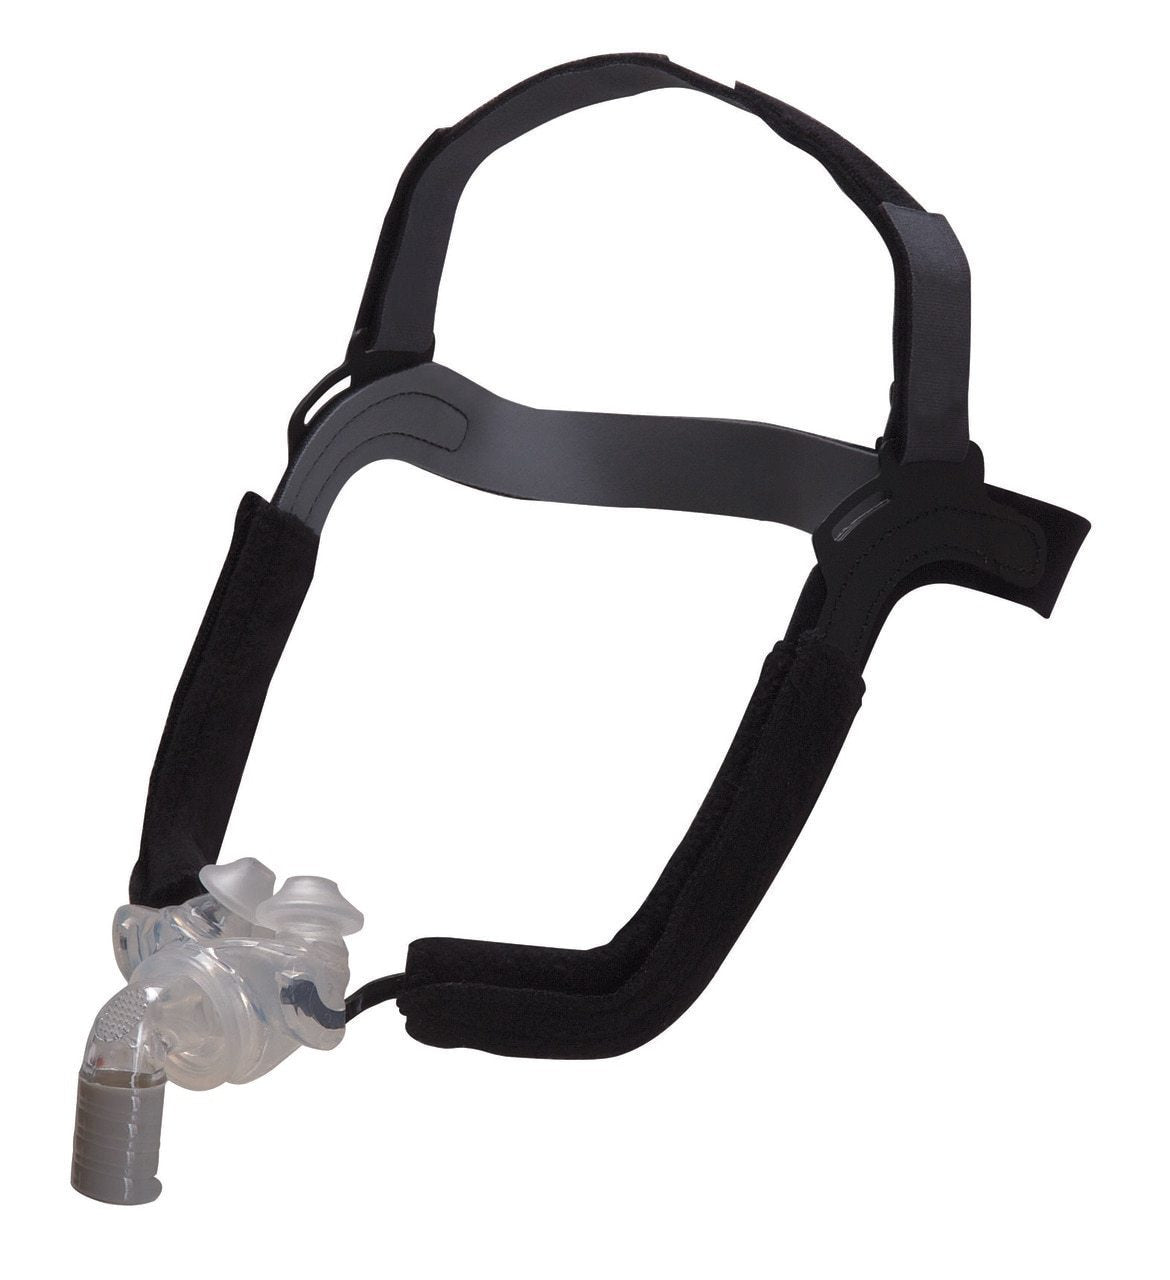 Salter Labs Aloha Nasal Pillow CPAP Mask with Headgear - All Sizes Included